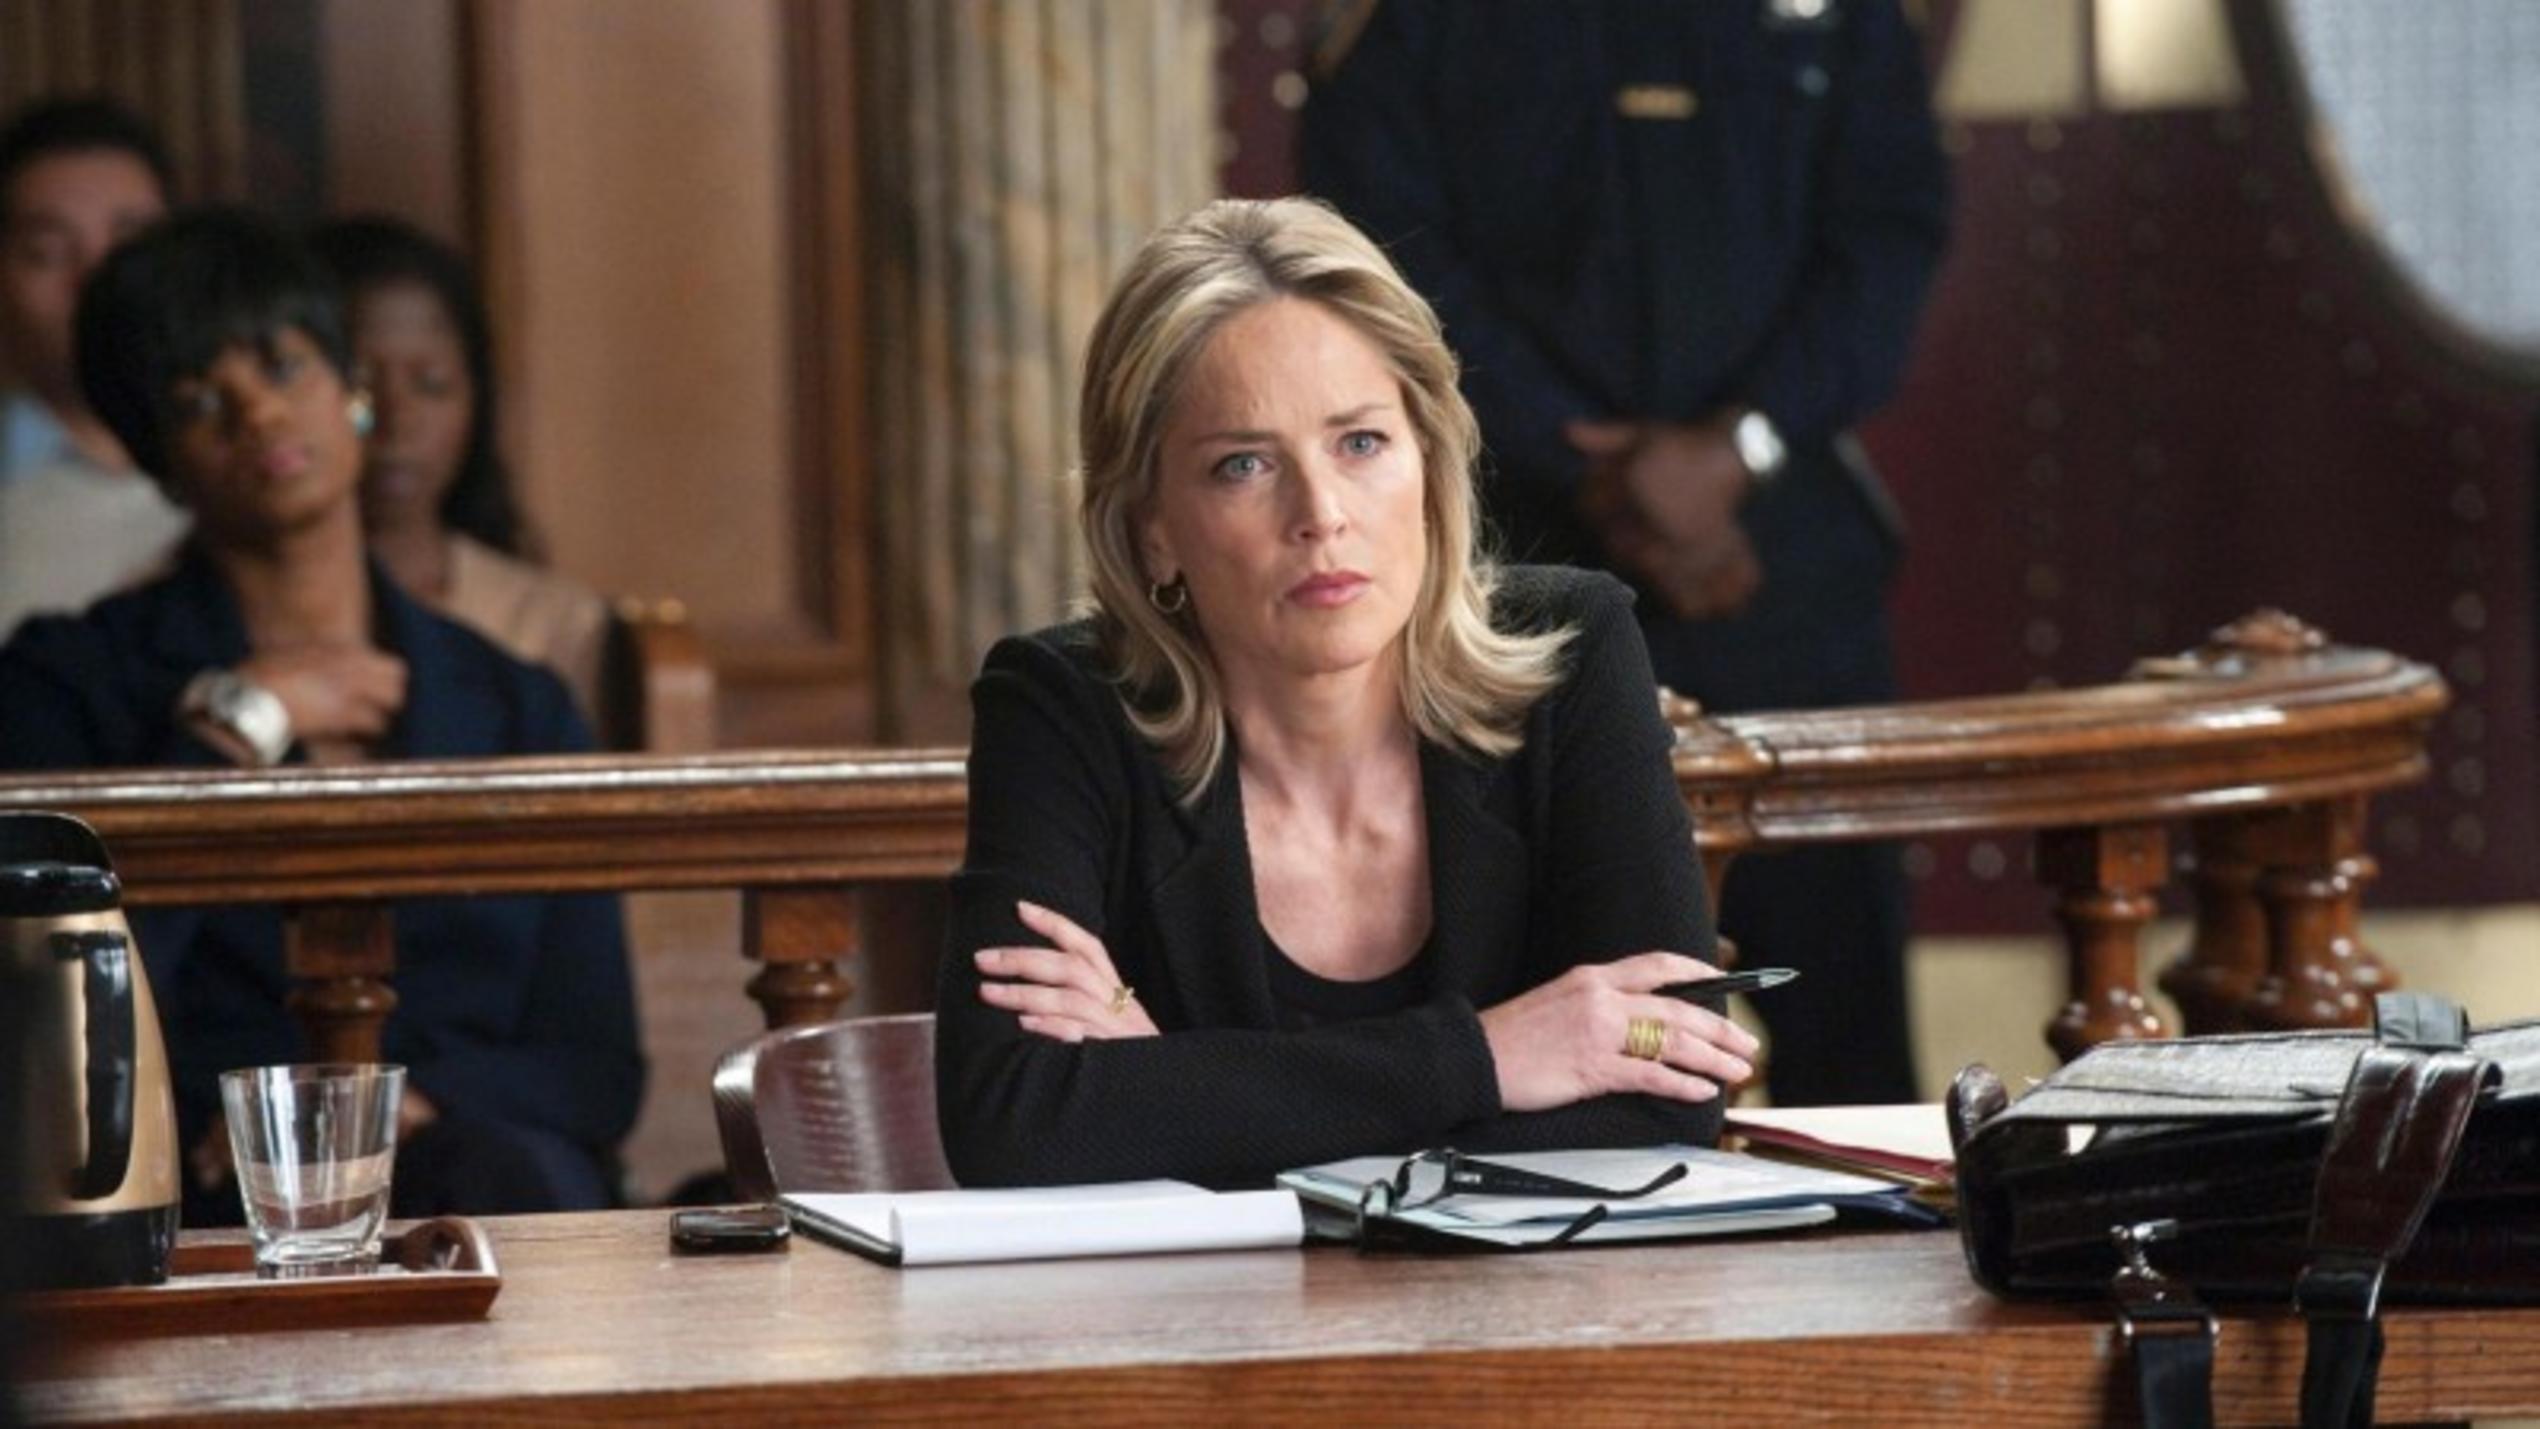 Sharon Stone in "Law & Order: SVU"